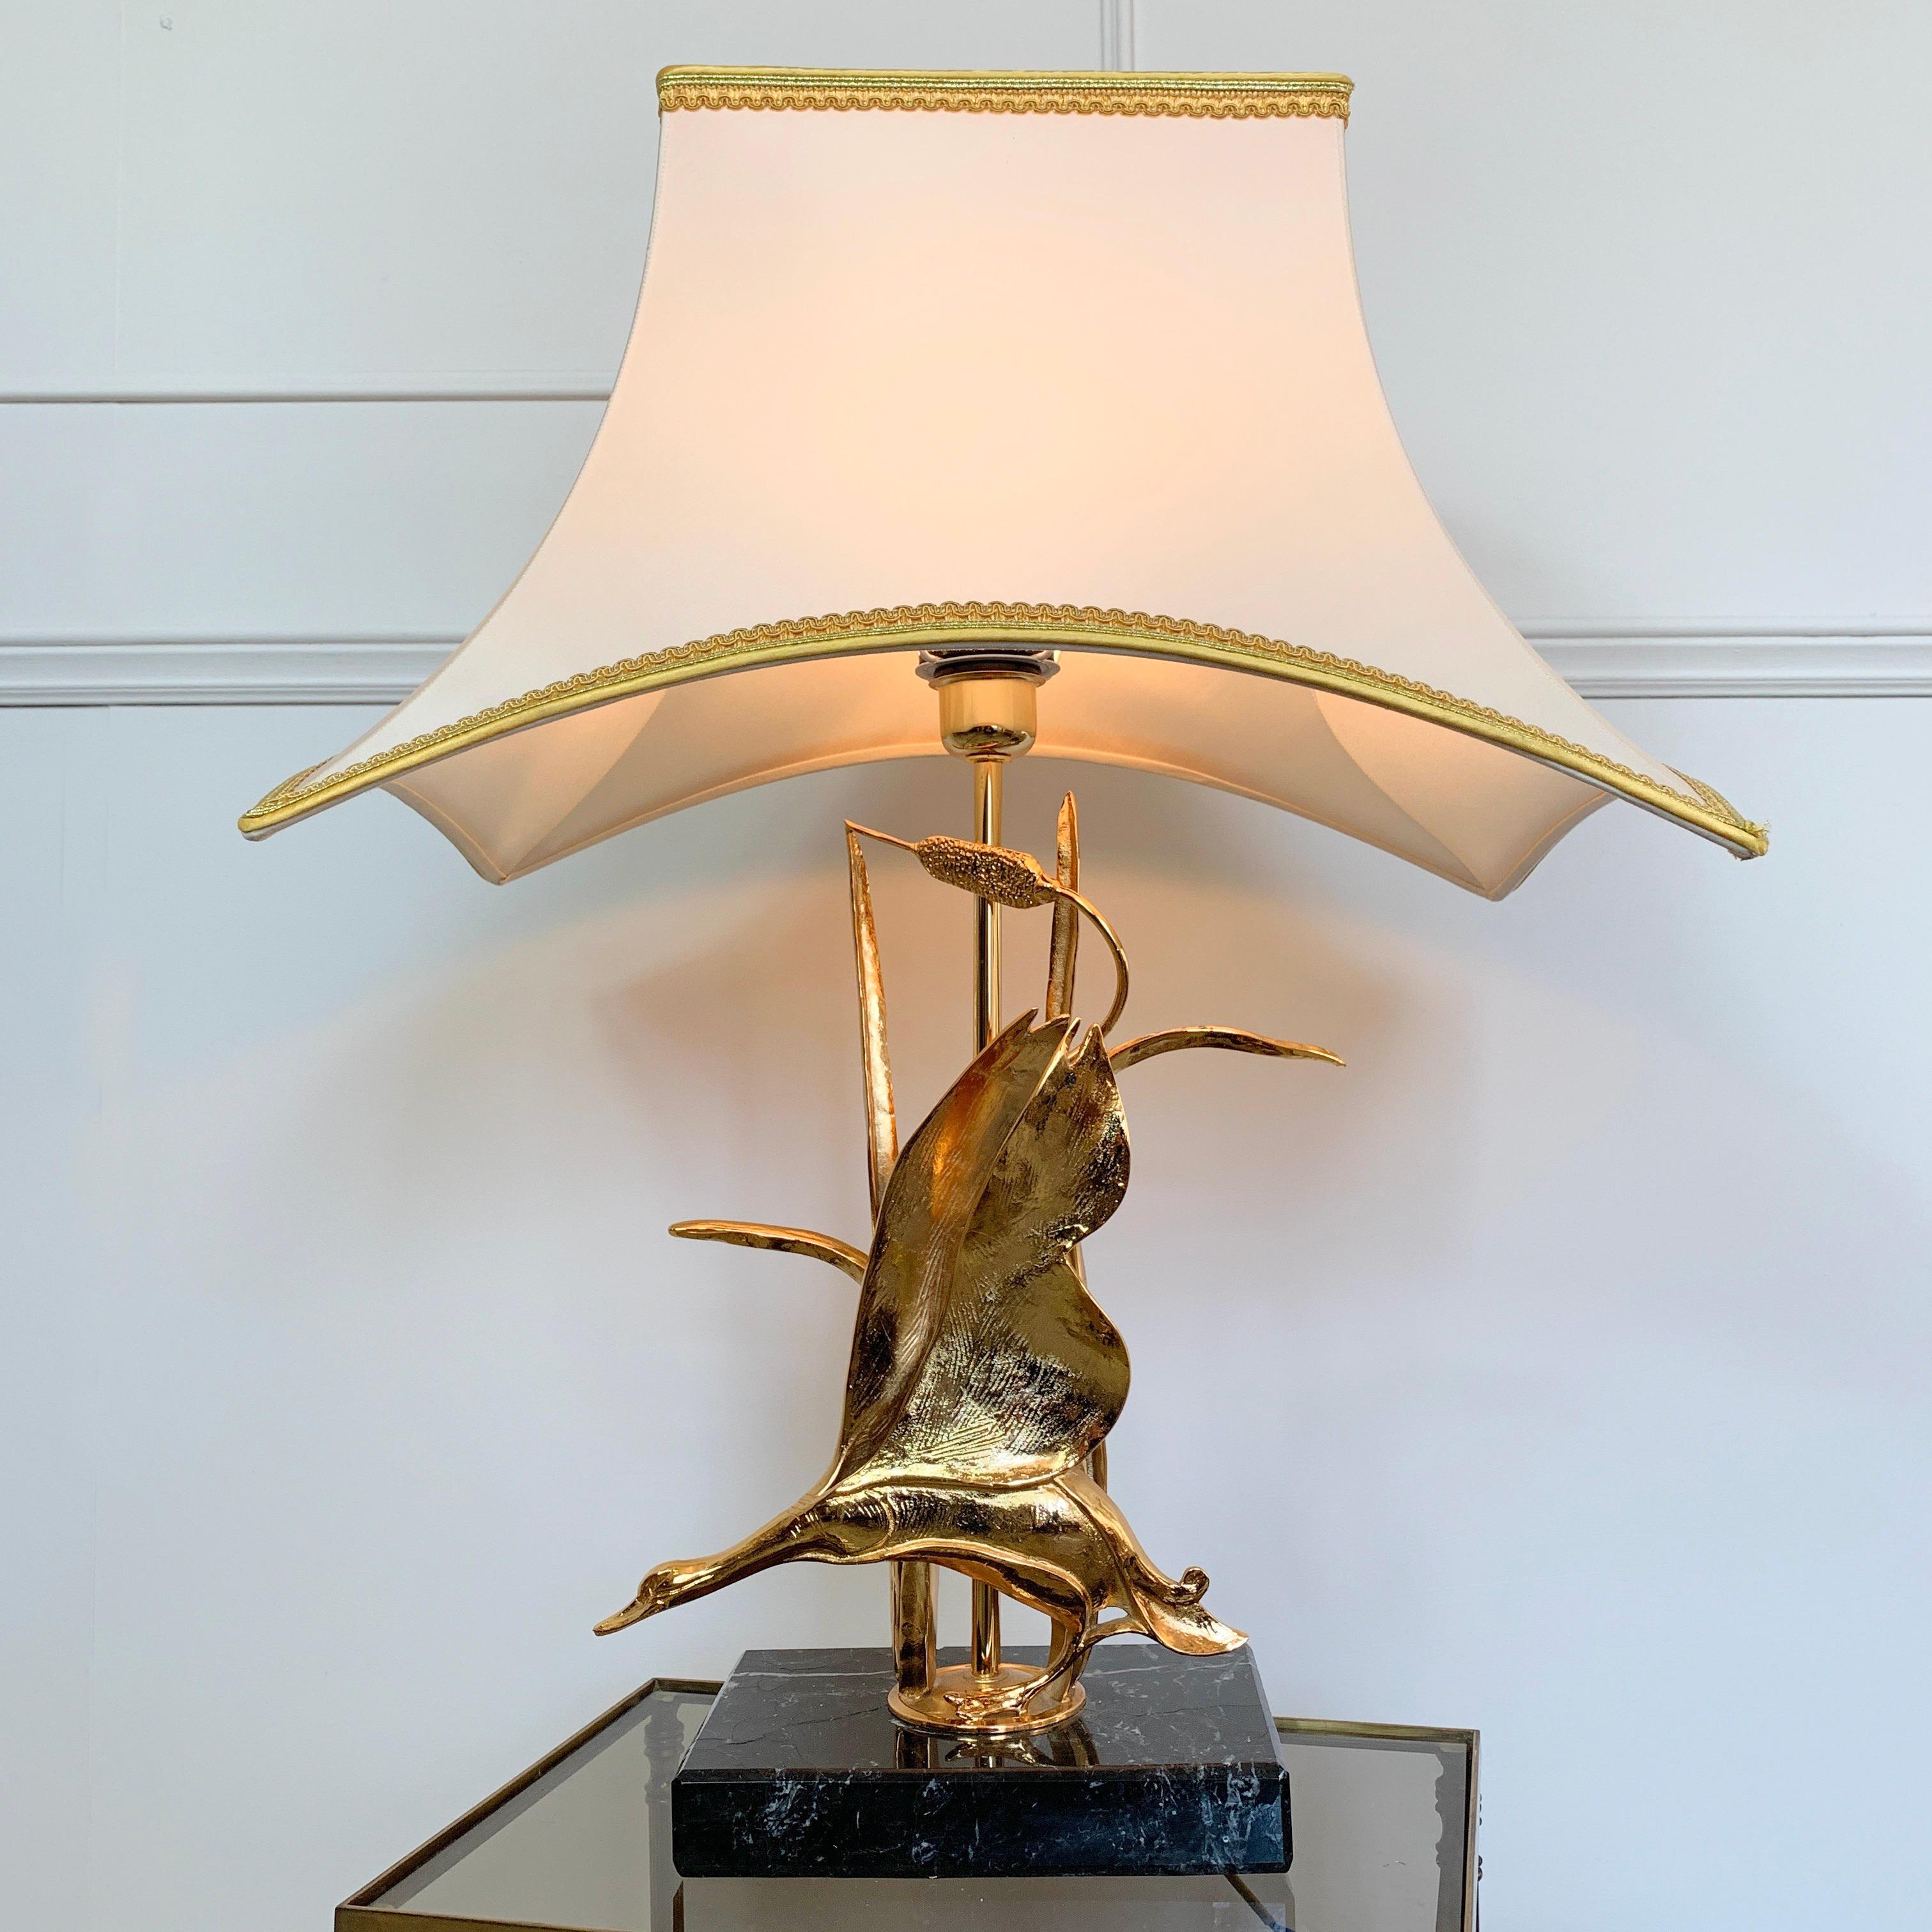 Lanciotto Galeotti Gold Goose Table Lamp, Italy, 1970s For Sale 3